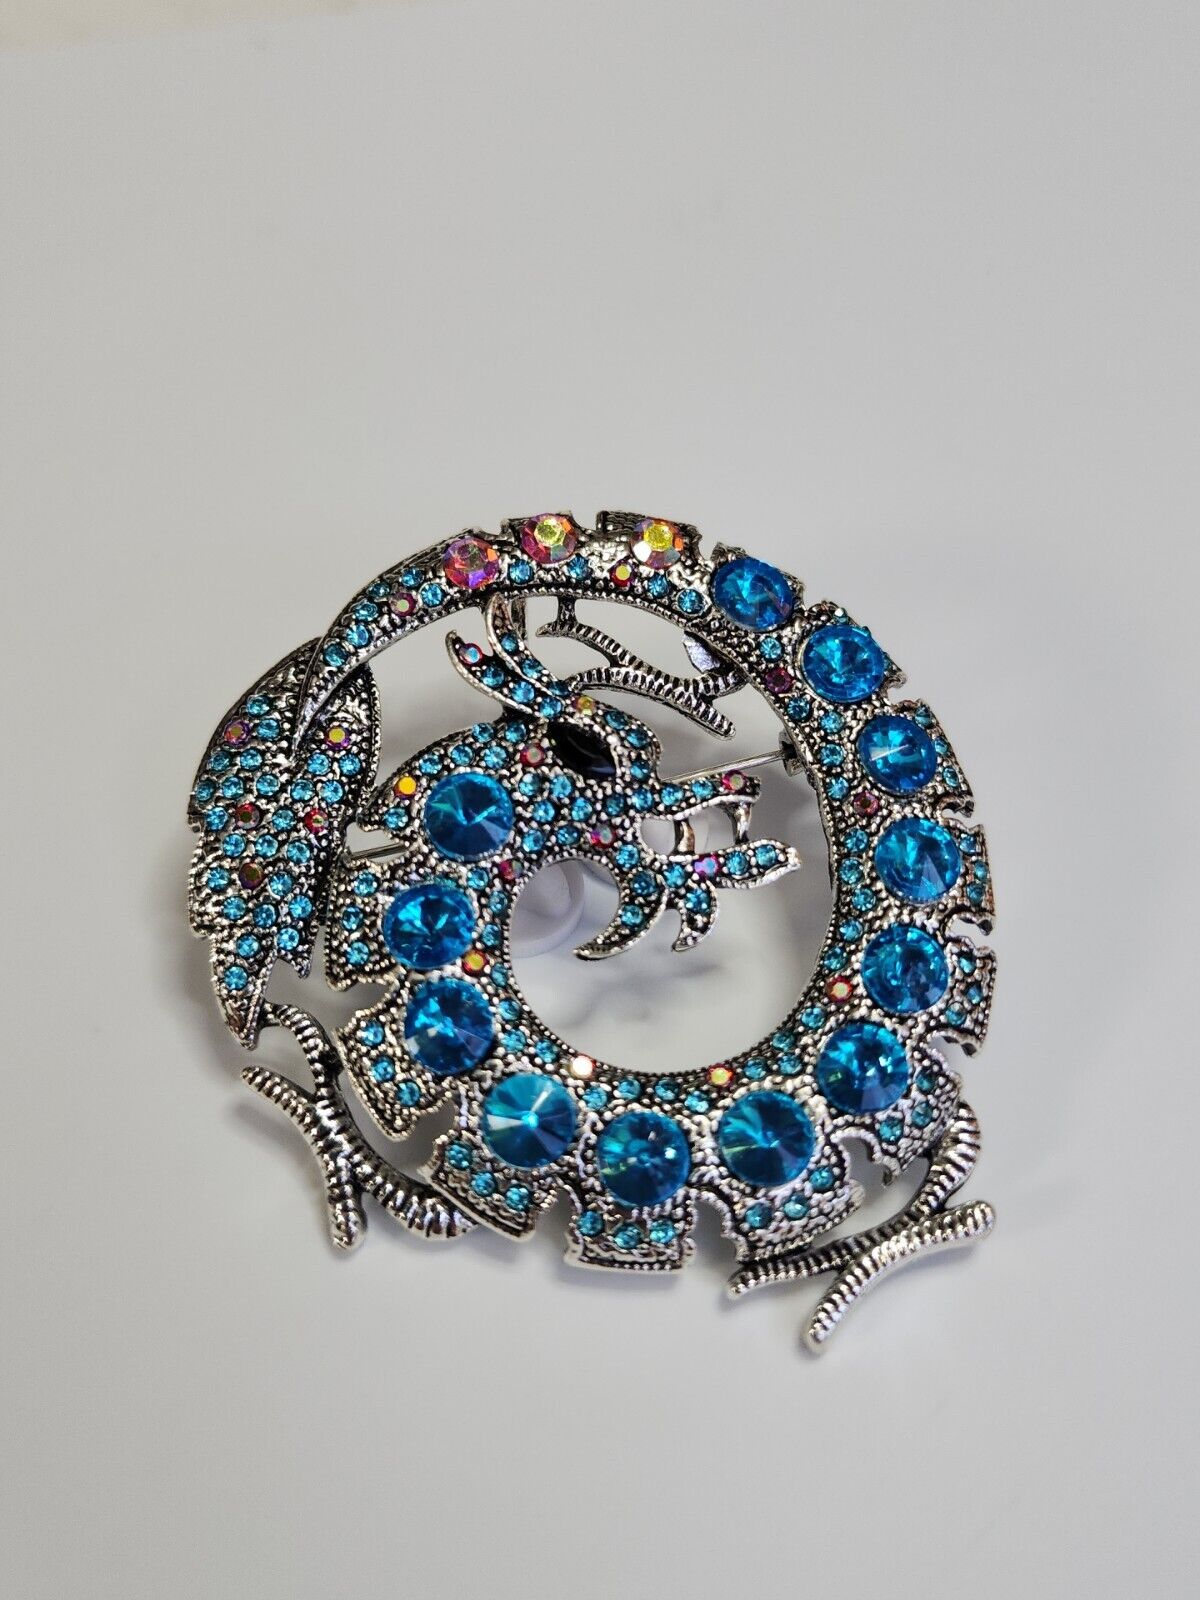 Dragon Brooch Pin Pendant Circle Encrusted Faceted Faux Gems Crystals Sparkly